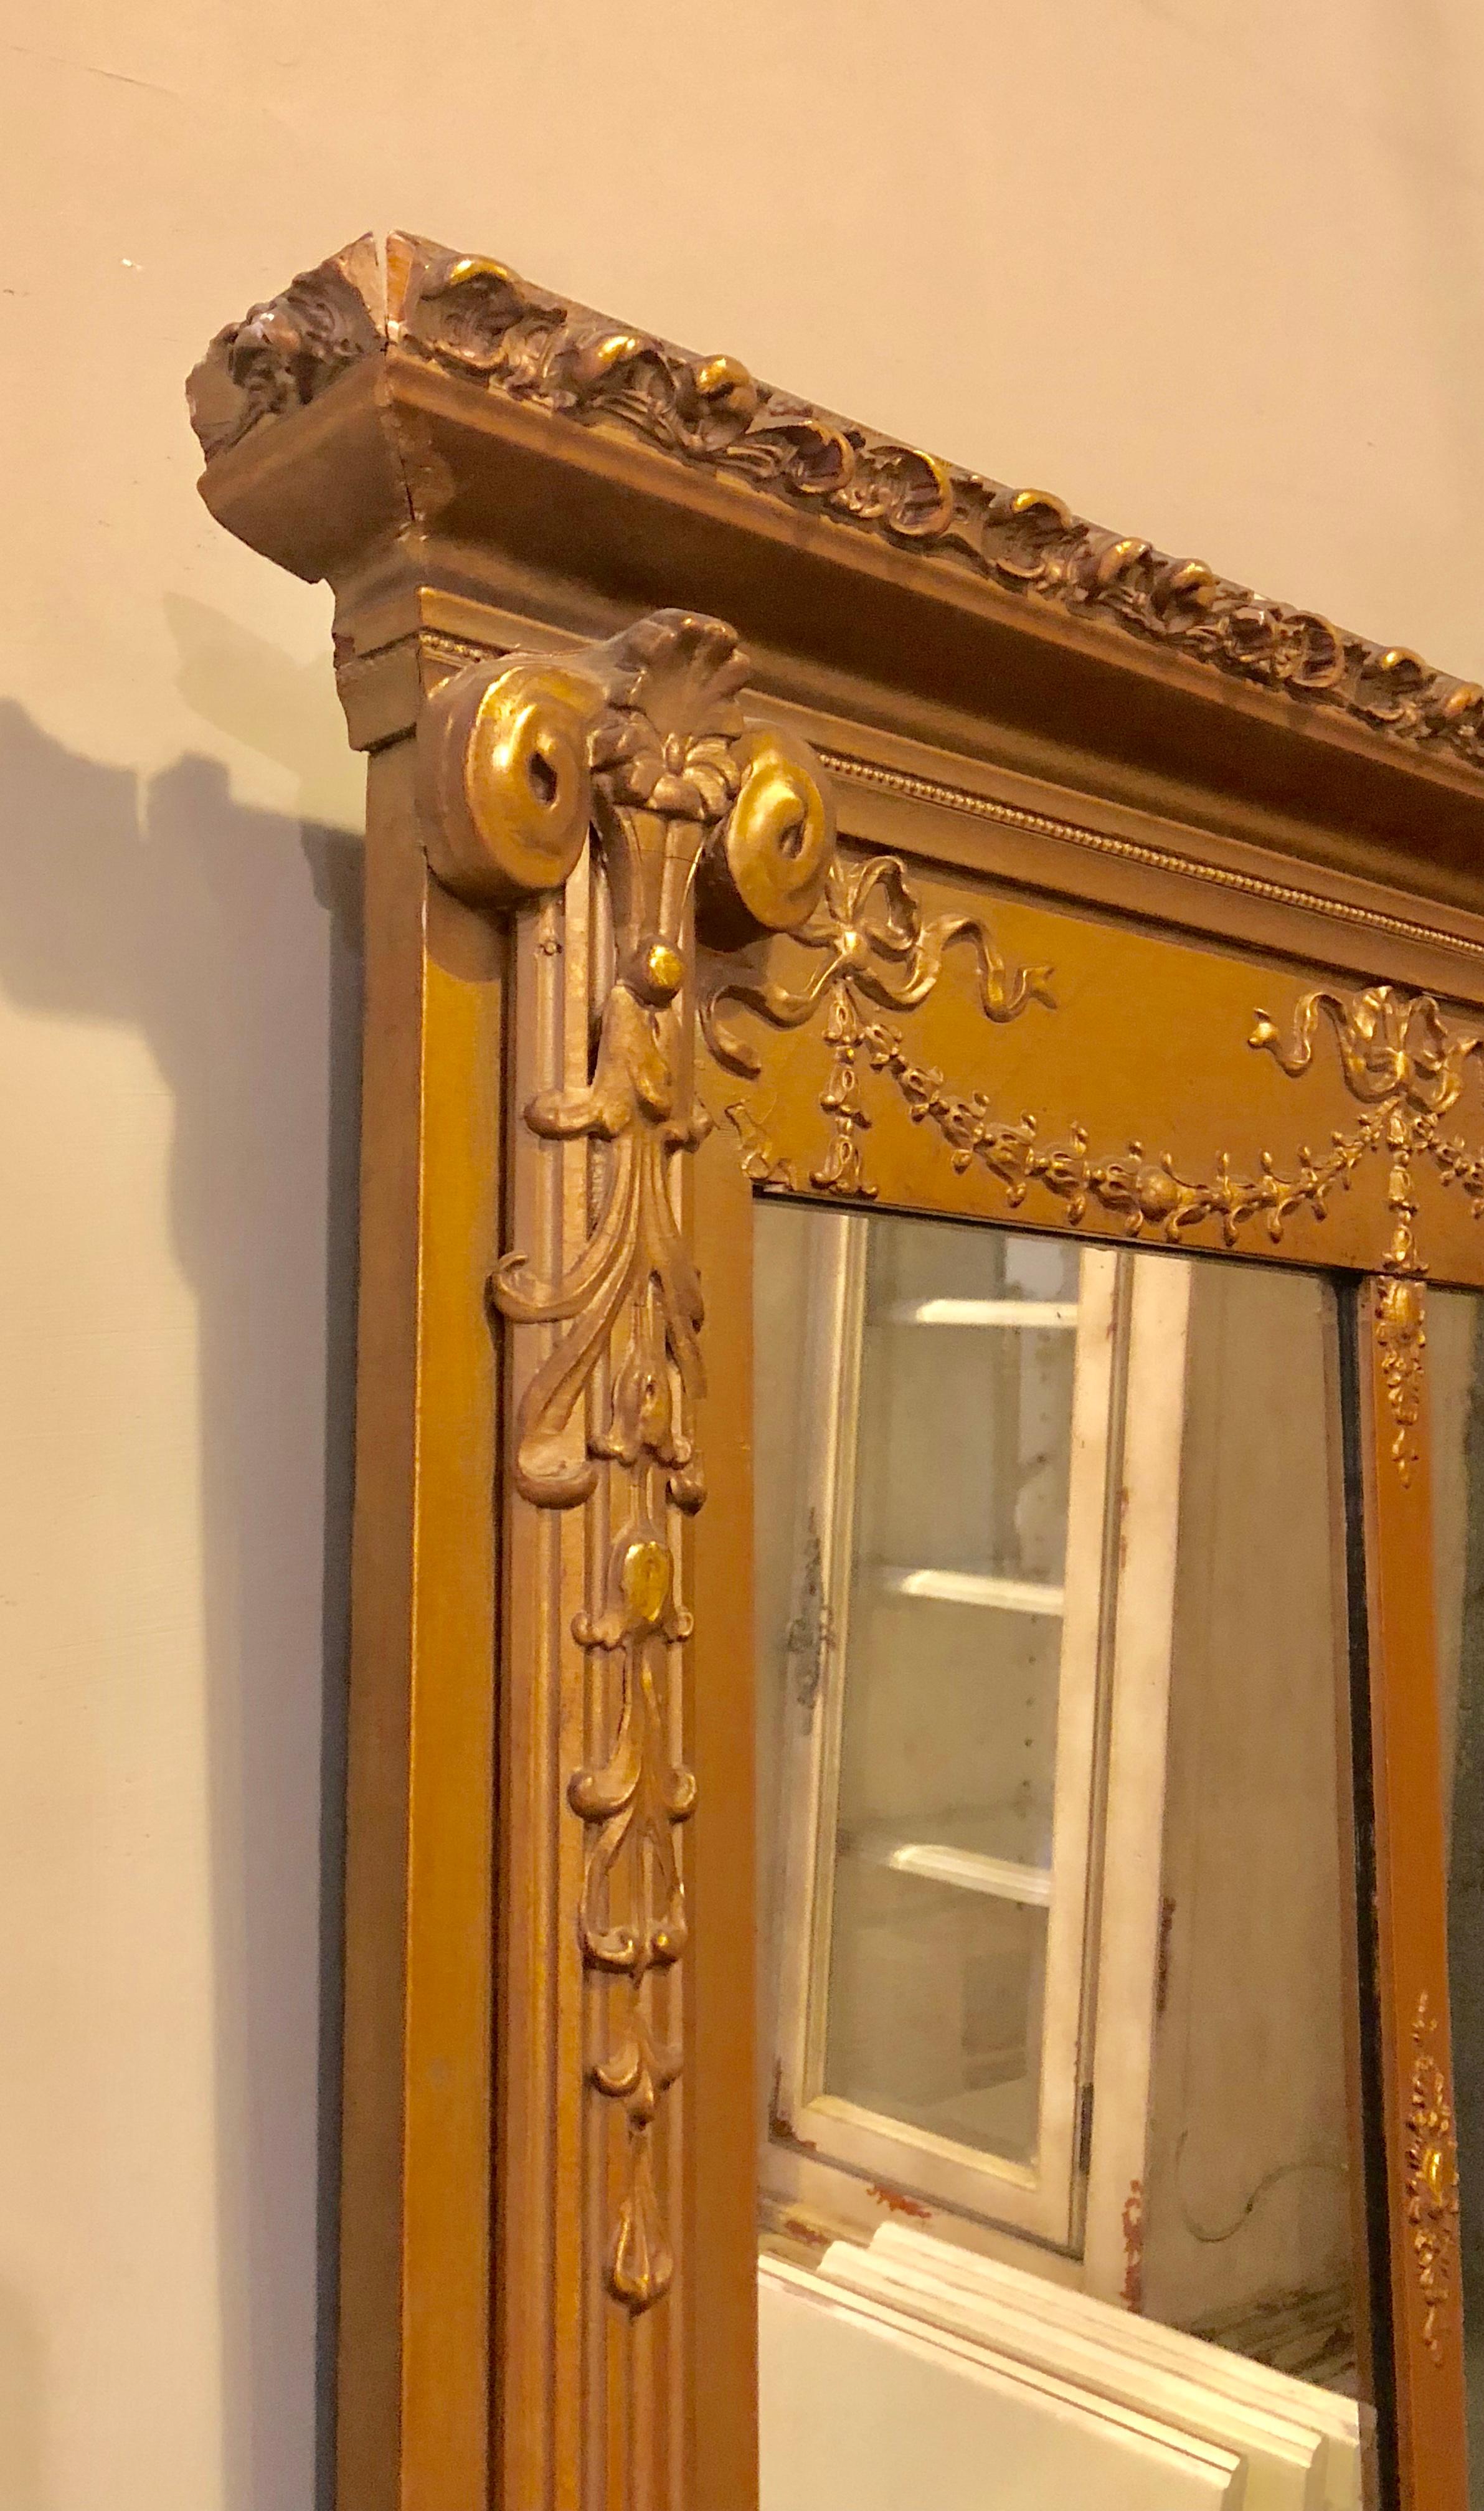 An antique Louis XVI style carved giltwood over the mantel mirror. This finely gilt over the mantel or console mirror has three panels flanked by column-form carved sides with a carved swag apron. The mirror itself with a clear center. The frame